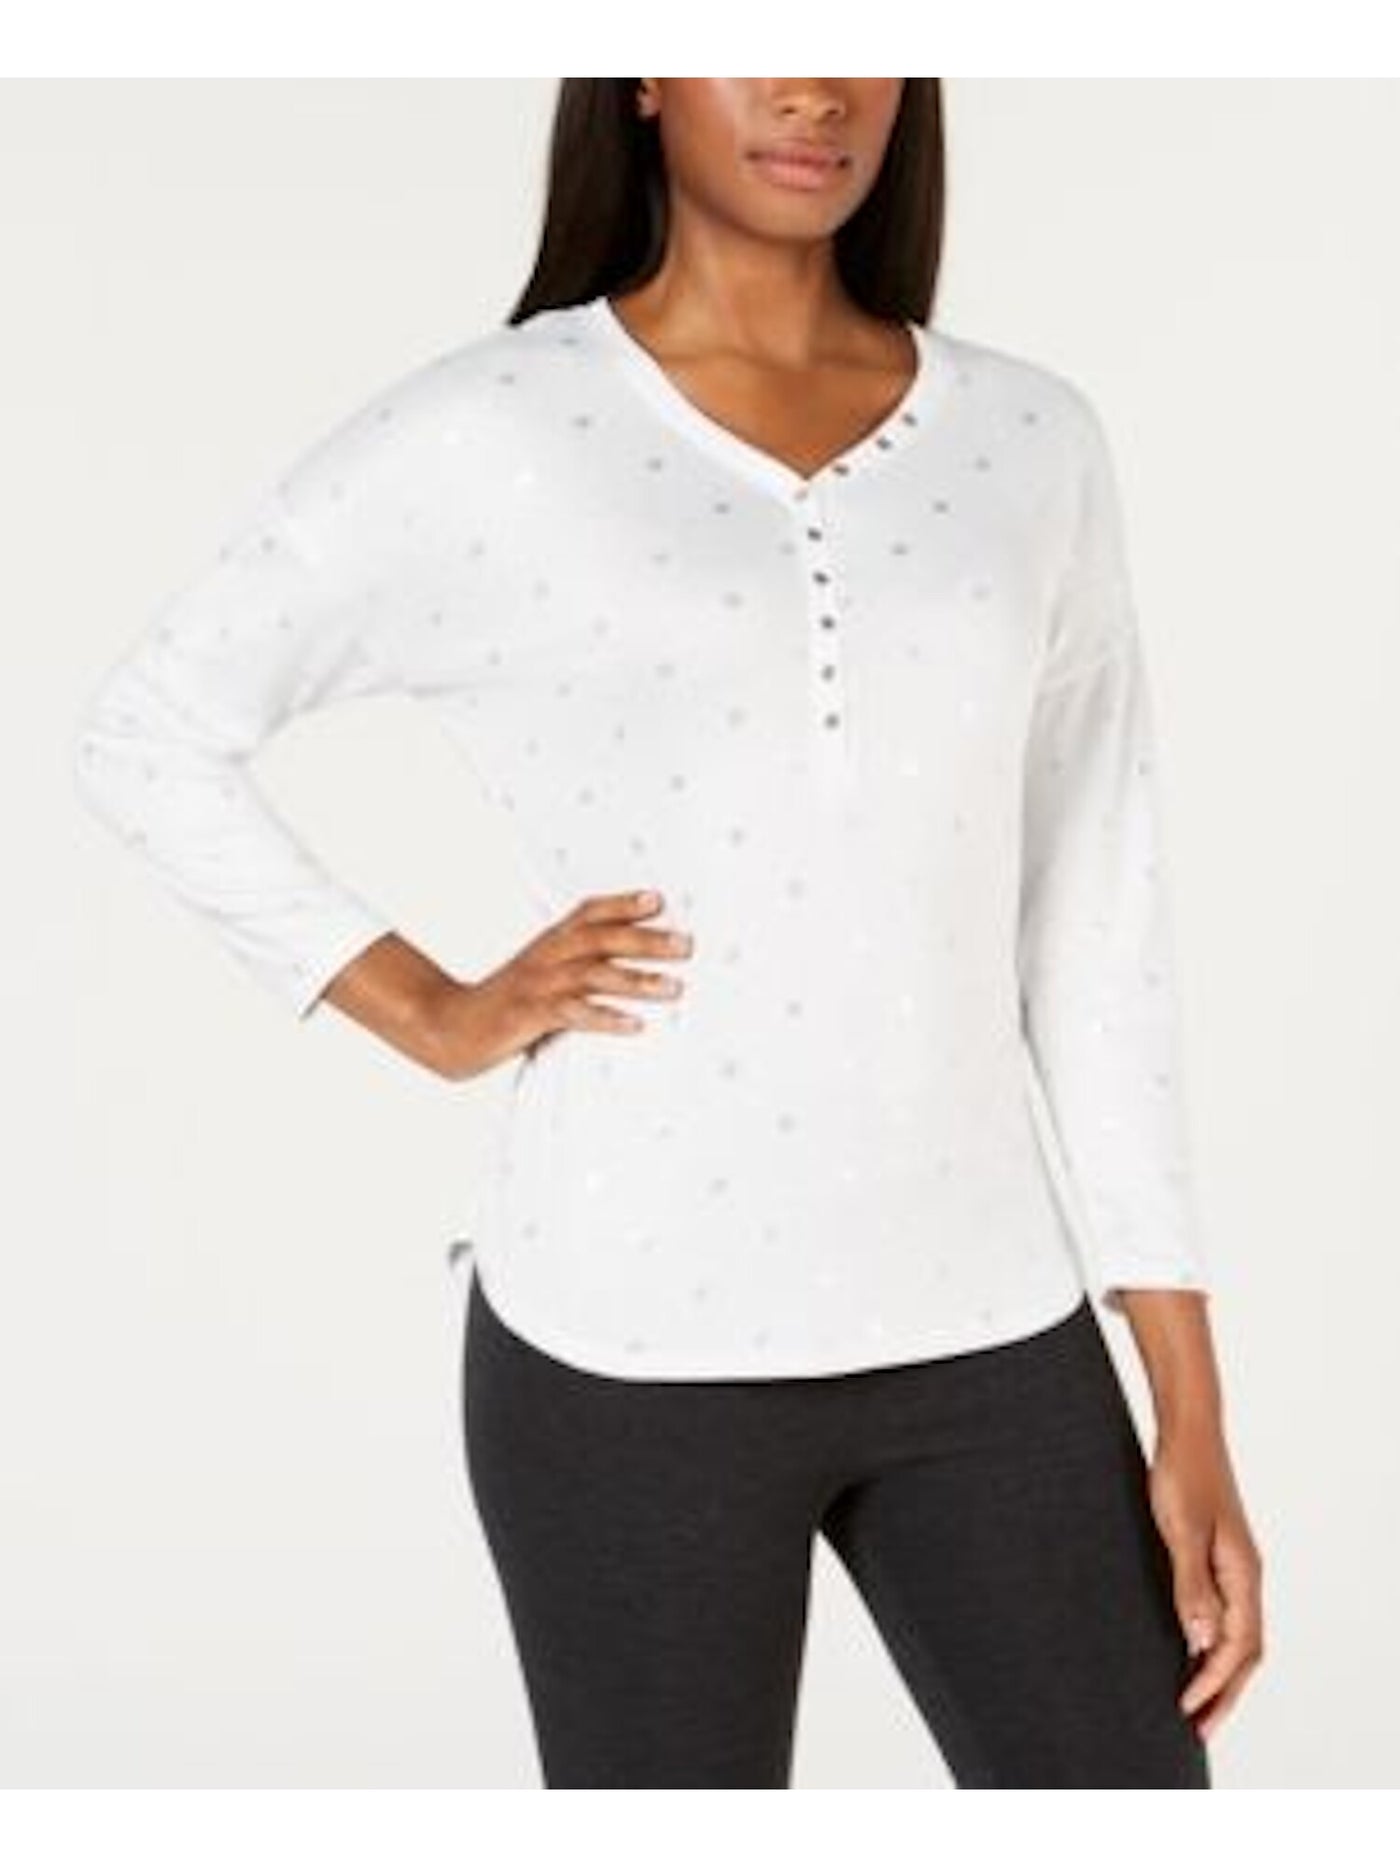 ANDE Womens Gray Polka Dot Long Sleeve With buttons Top S